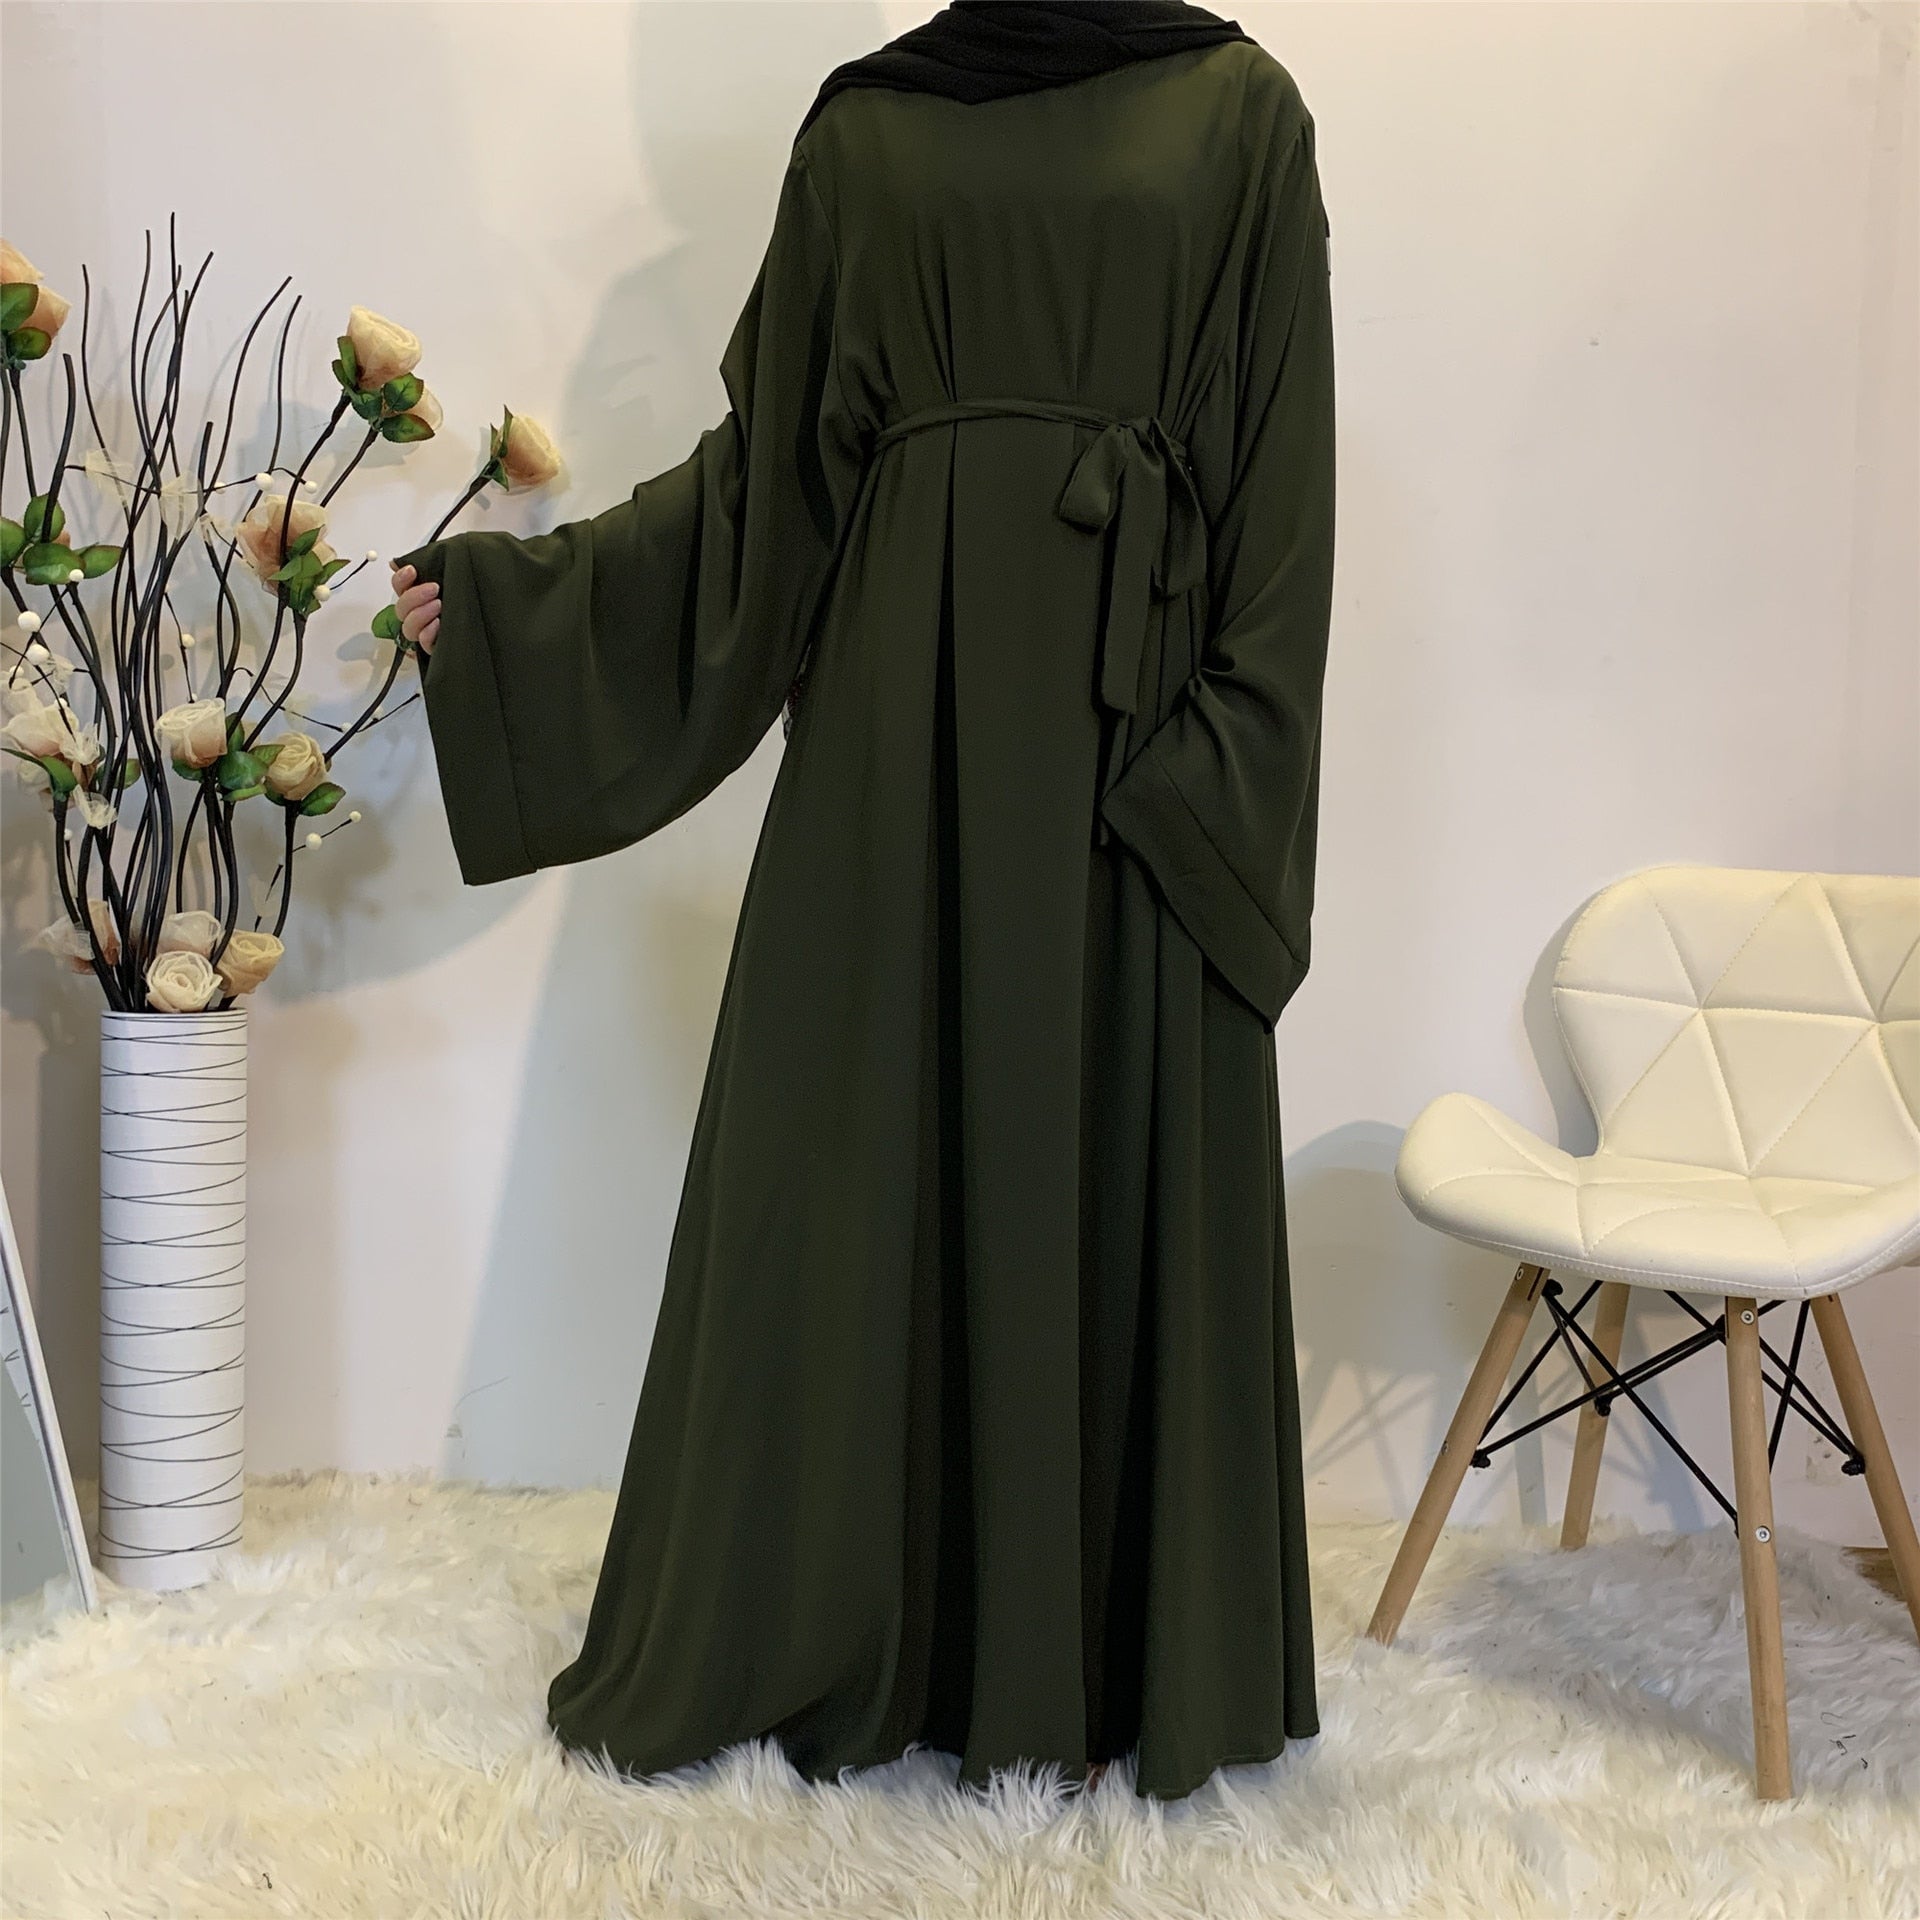 Chic and Modest: Muslim Fashion Hijab Dubai Abaya Long Dresses with Sashes for Women - Flexi Africa - Flexi Africa offers Free Delivery Worldwide - Vibrant African traditional clothing showcasing bold prints and intricate designs